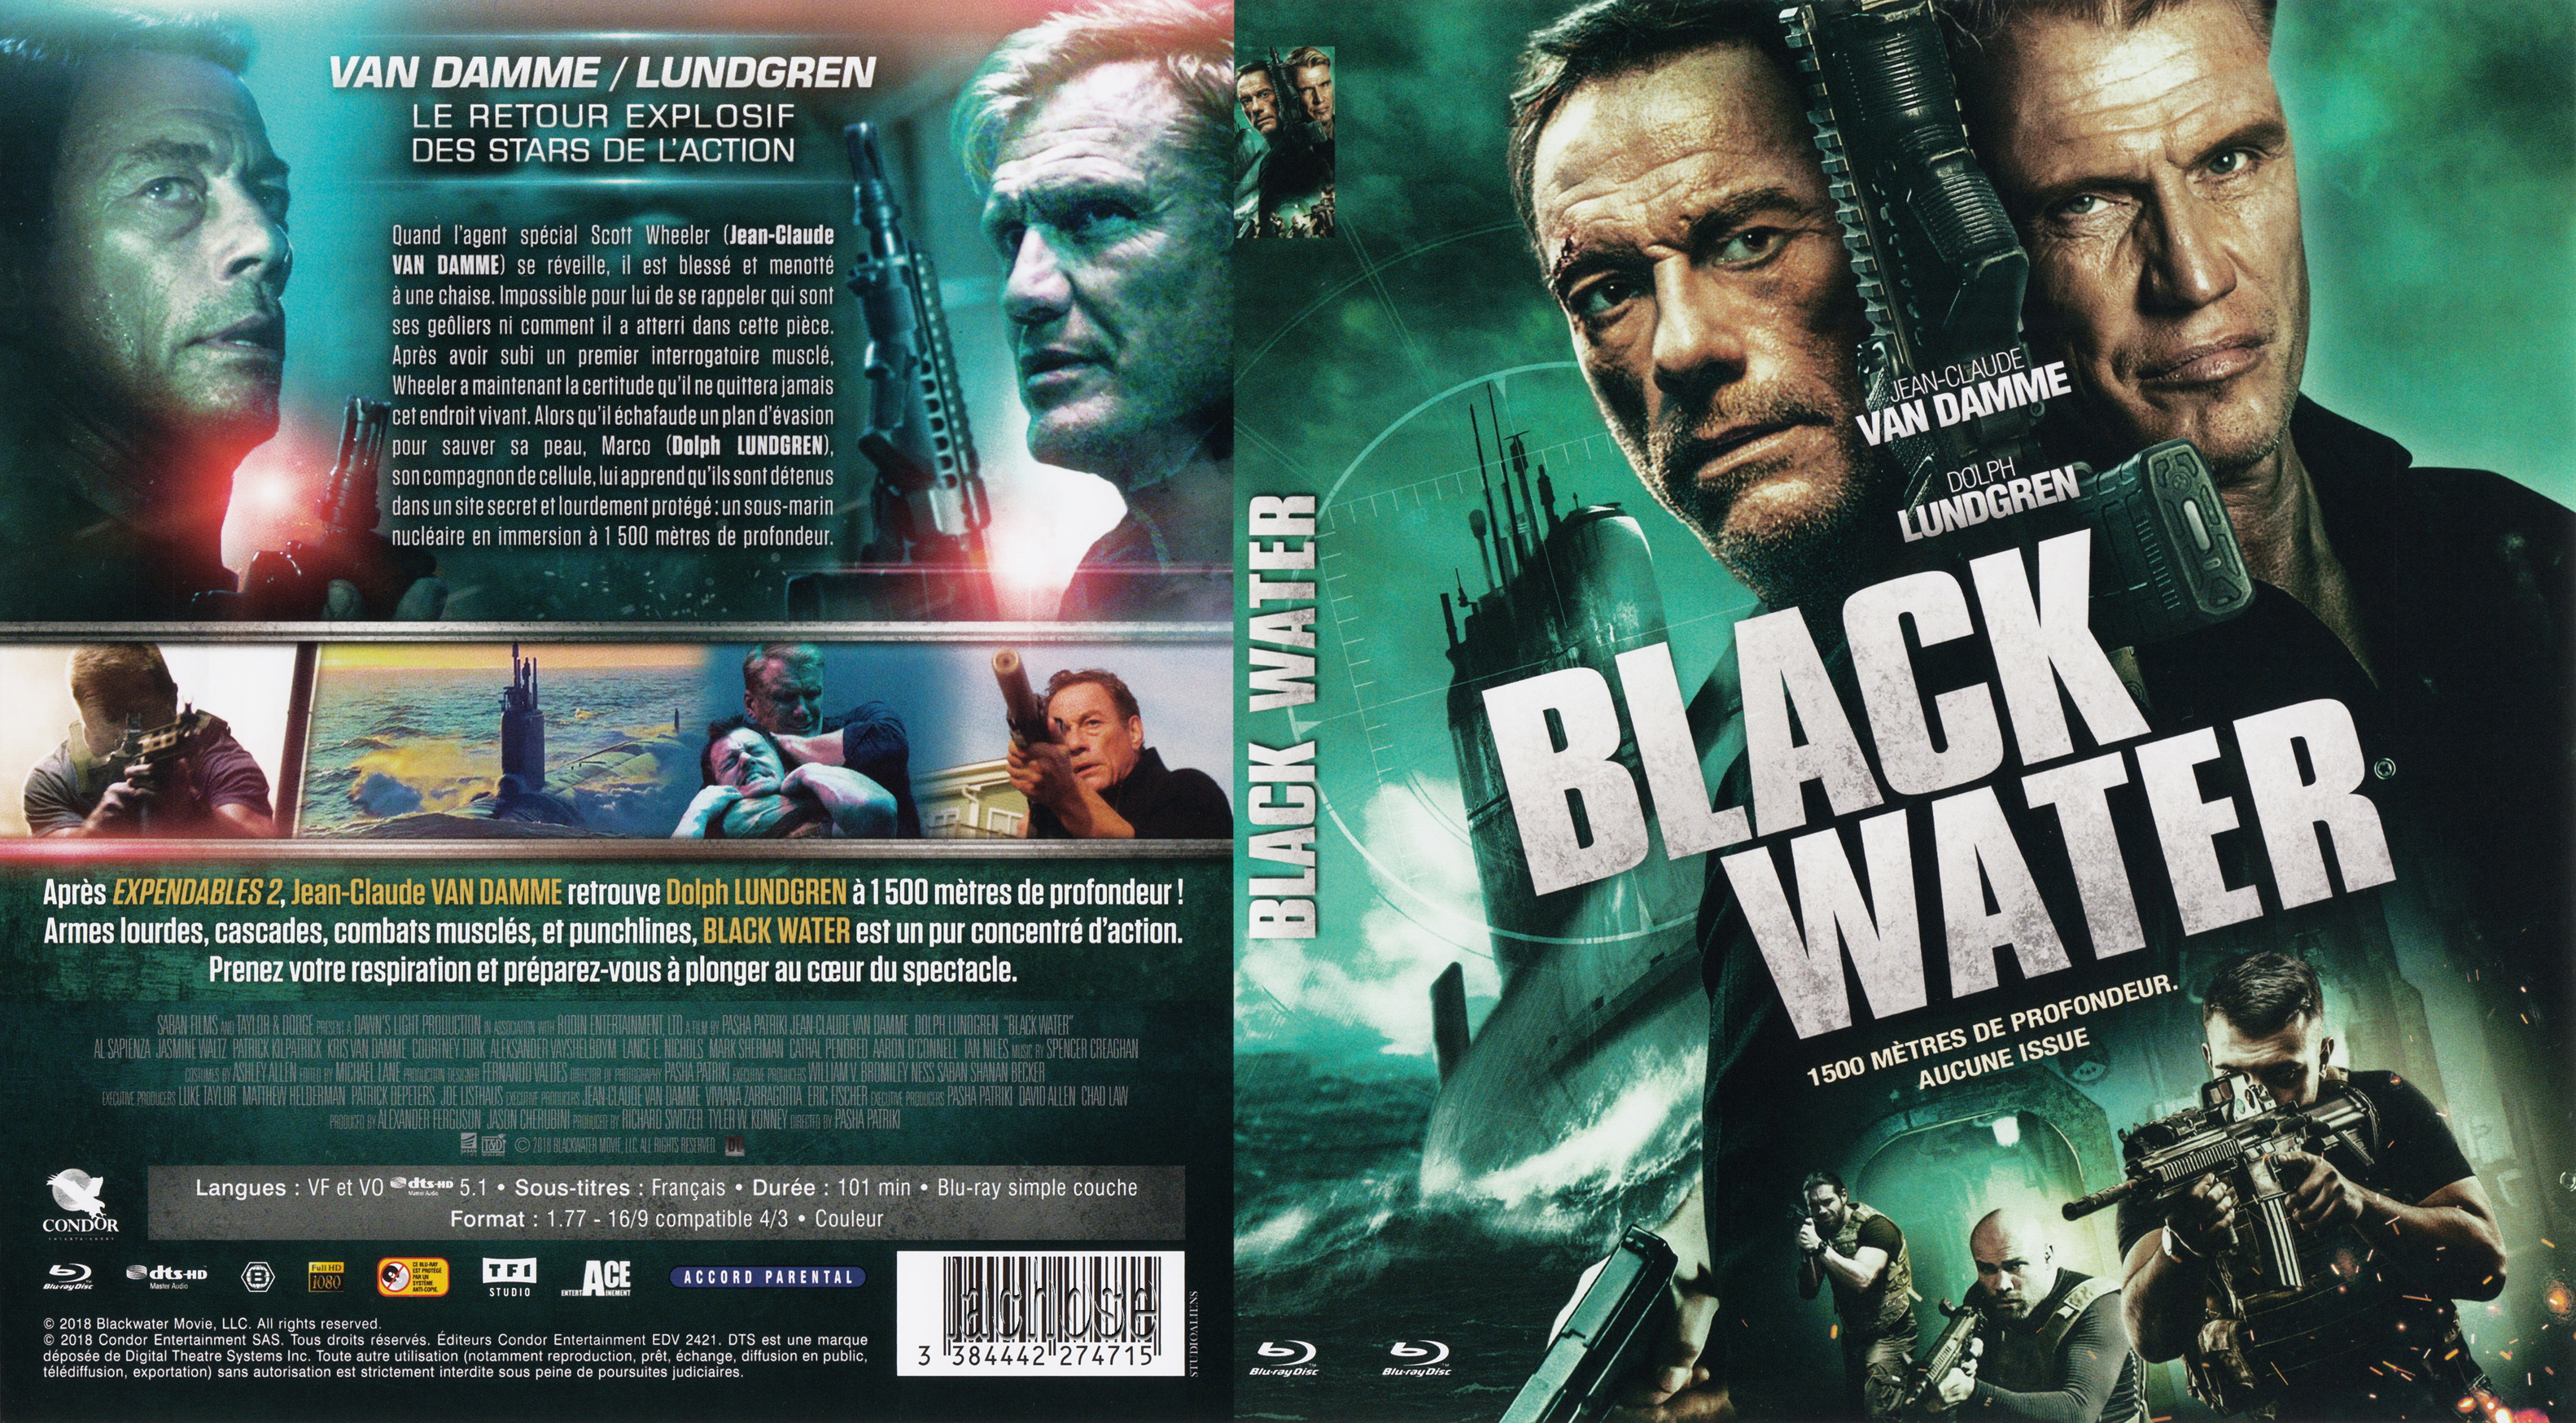 Jaquette DVD Black water 2018 (BLU-RAY)